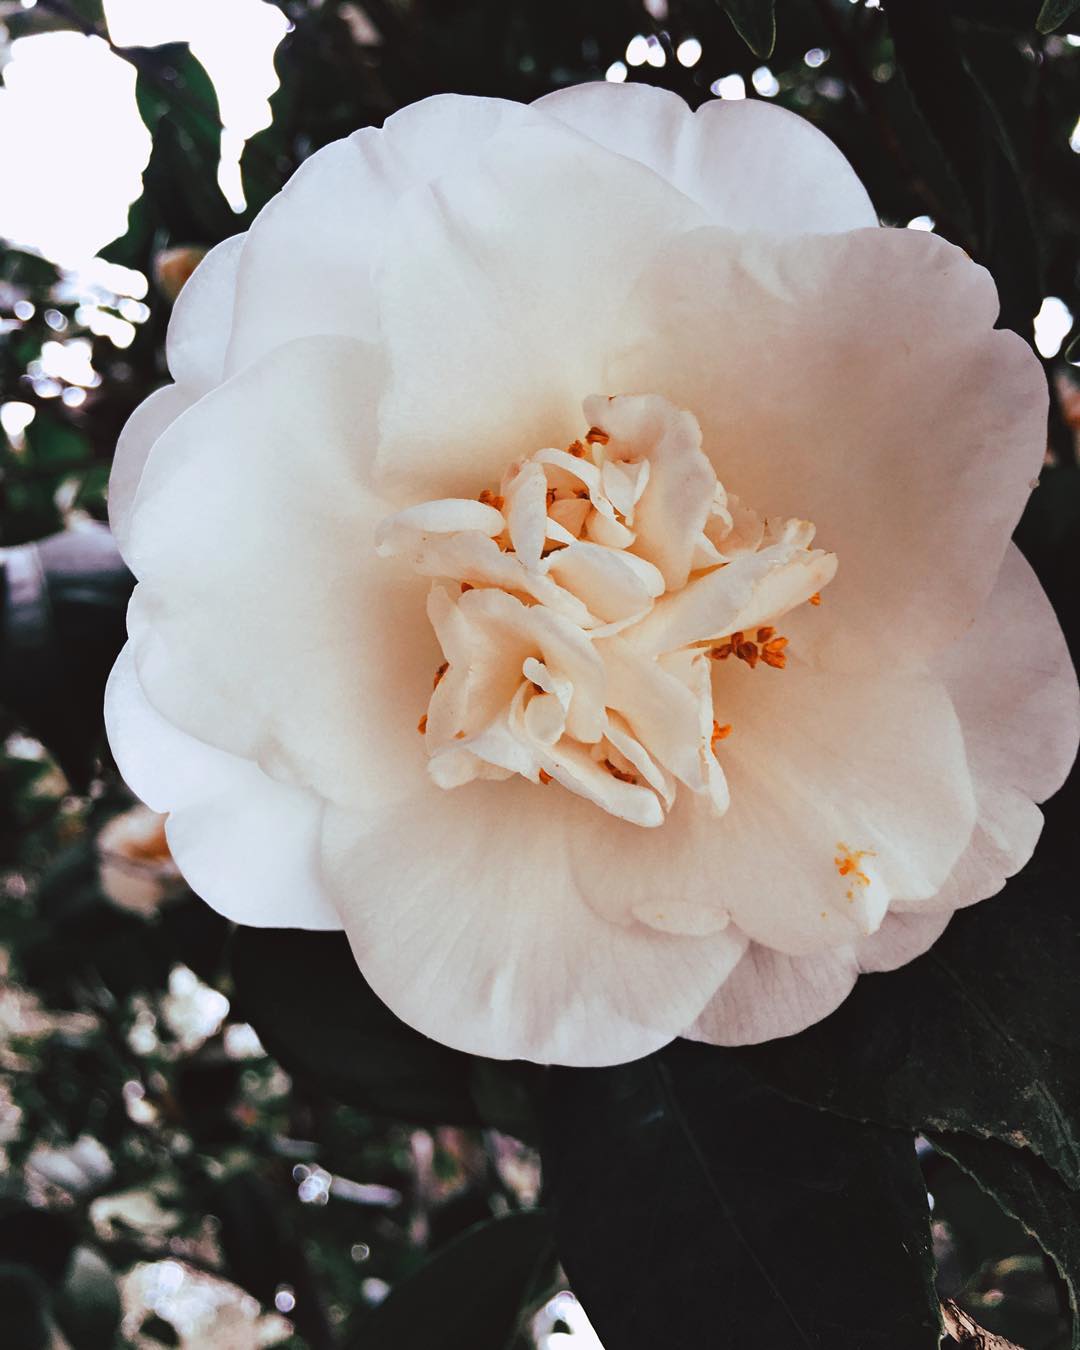 alright-back-onto-the-iphone-adventure-pics-for-a-bit-till-i-load-up-my-next-slr-stuff-fabulous-white-flower-all-up-on-the-scrippscollege-margaretfowlergarden-man-i-miss-school-so-much-22366-scrippscollege_23936693214_o.jpg